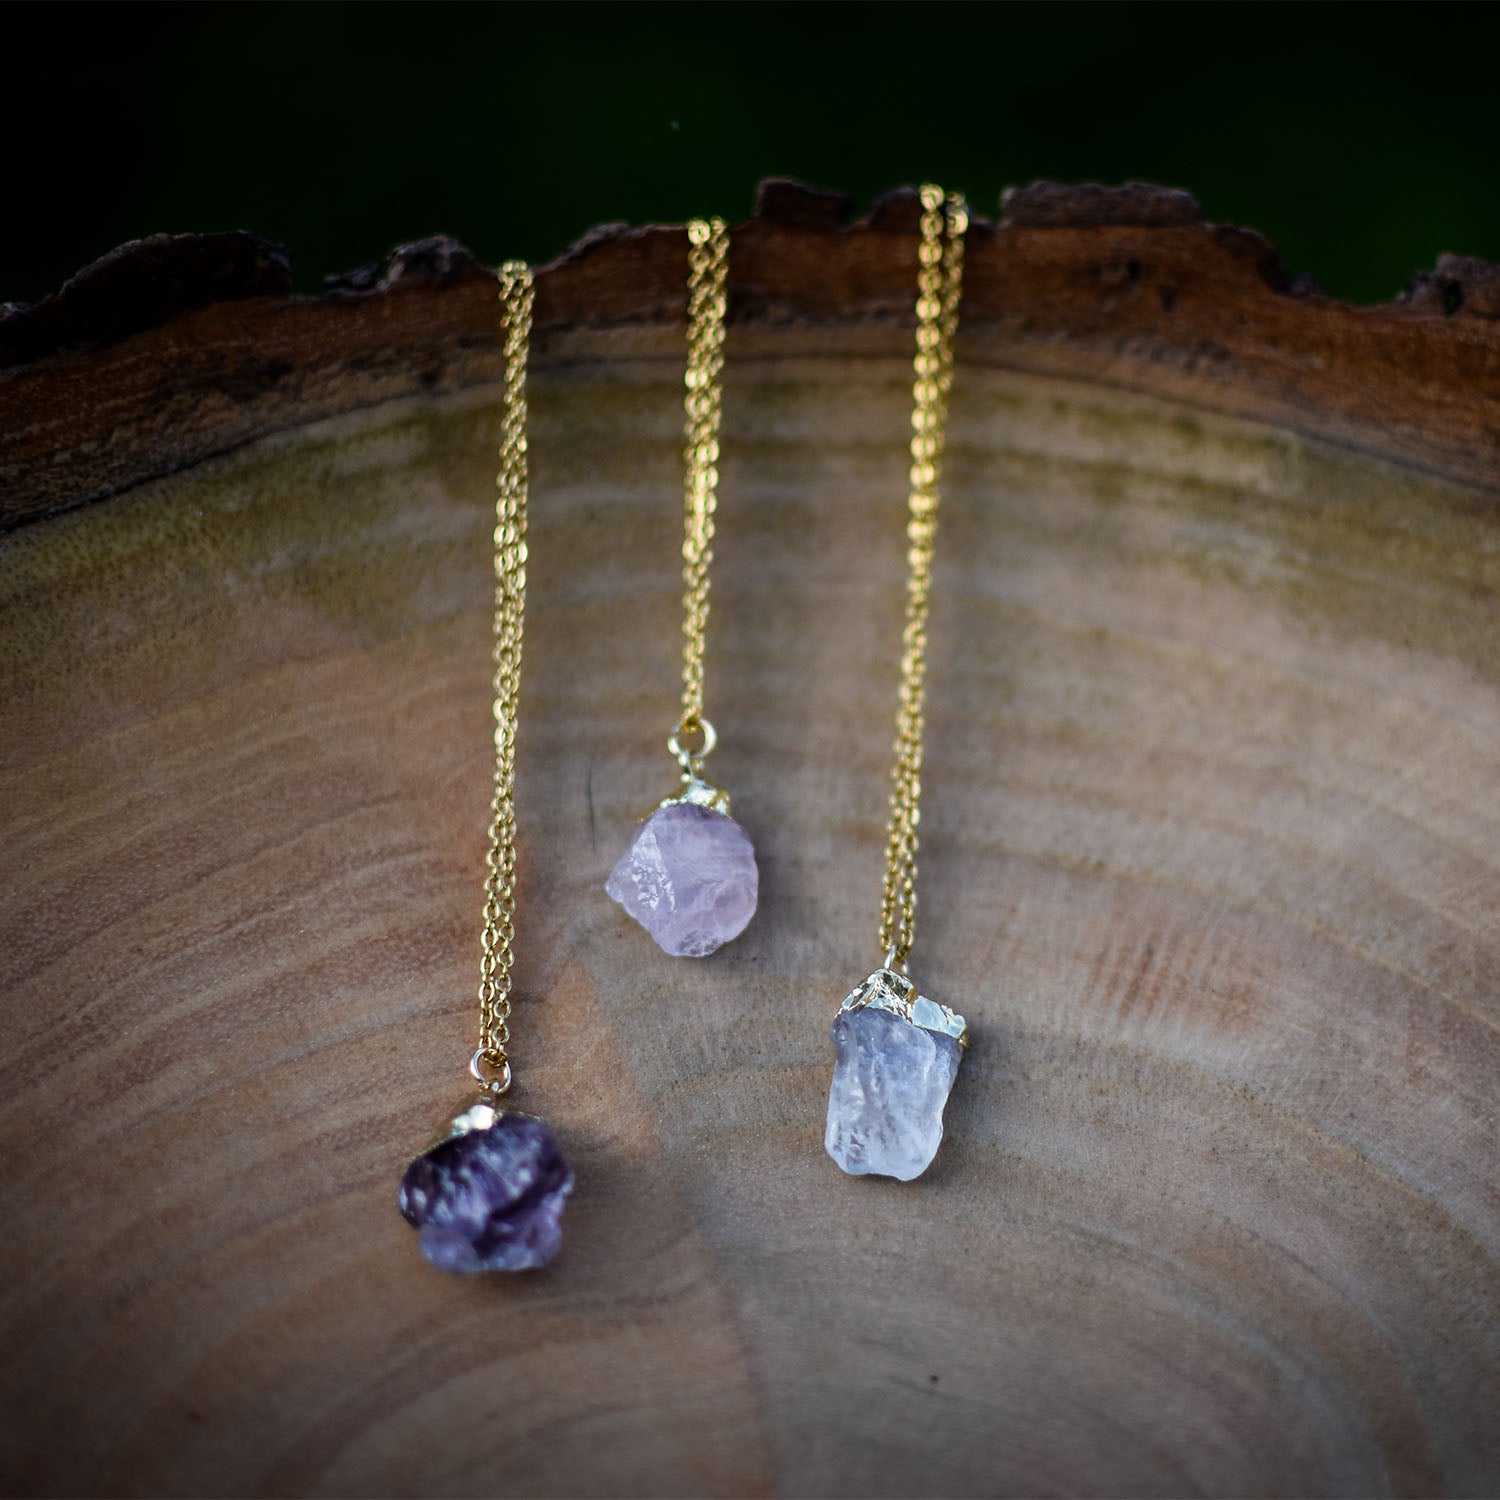 C1V1L Jewelry Is A Real Gem - Donating A Portion Of All Sales To